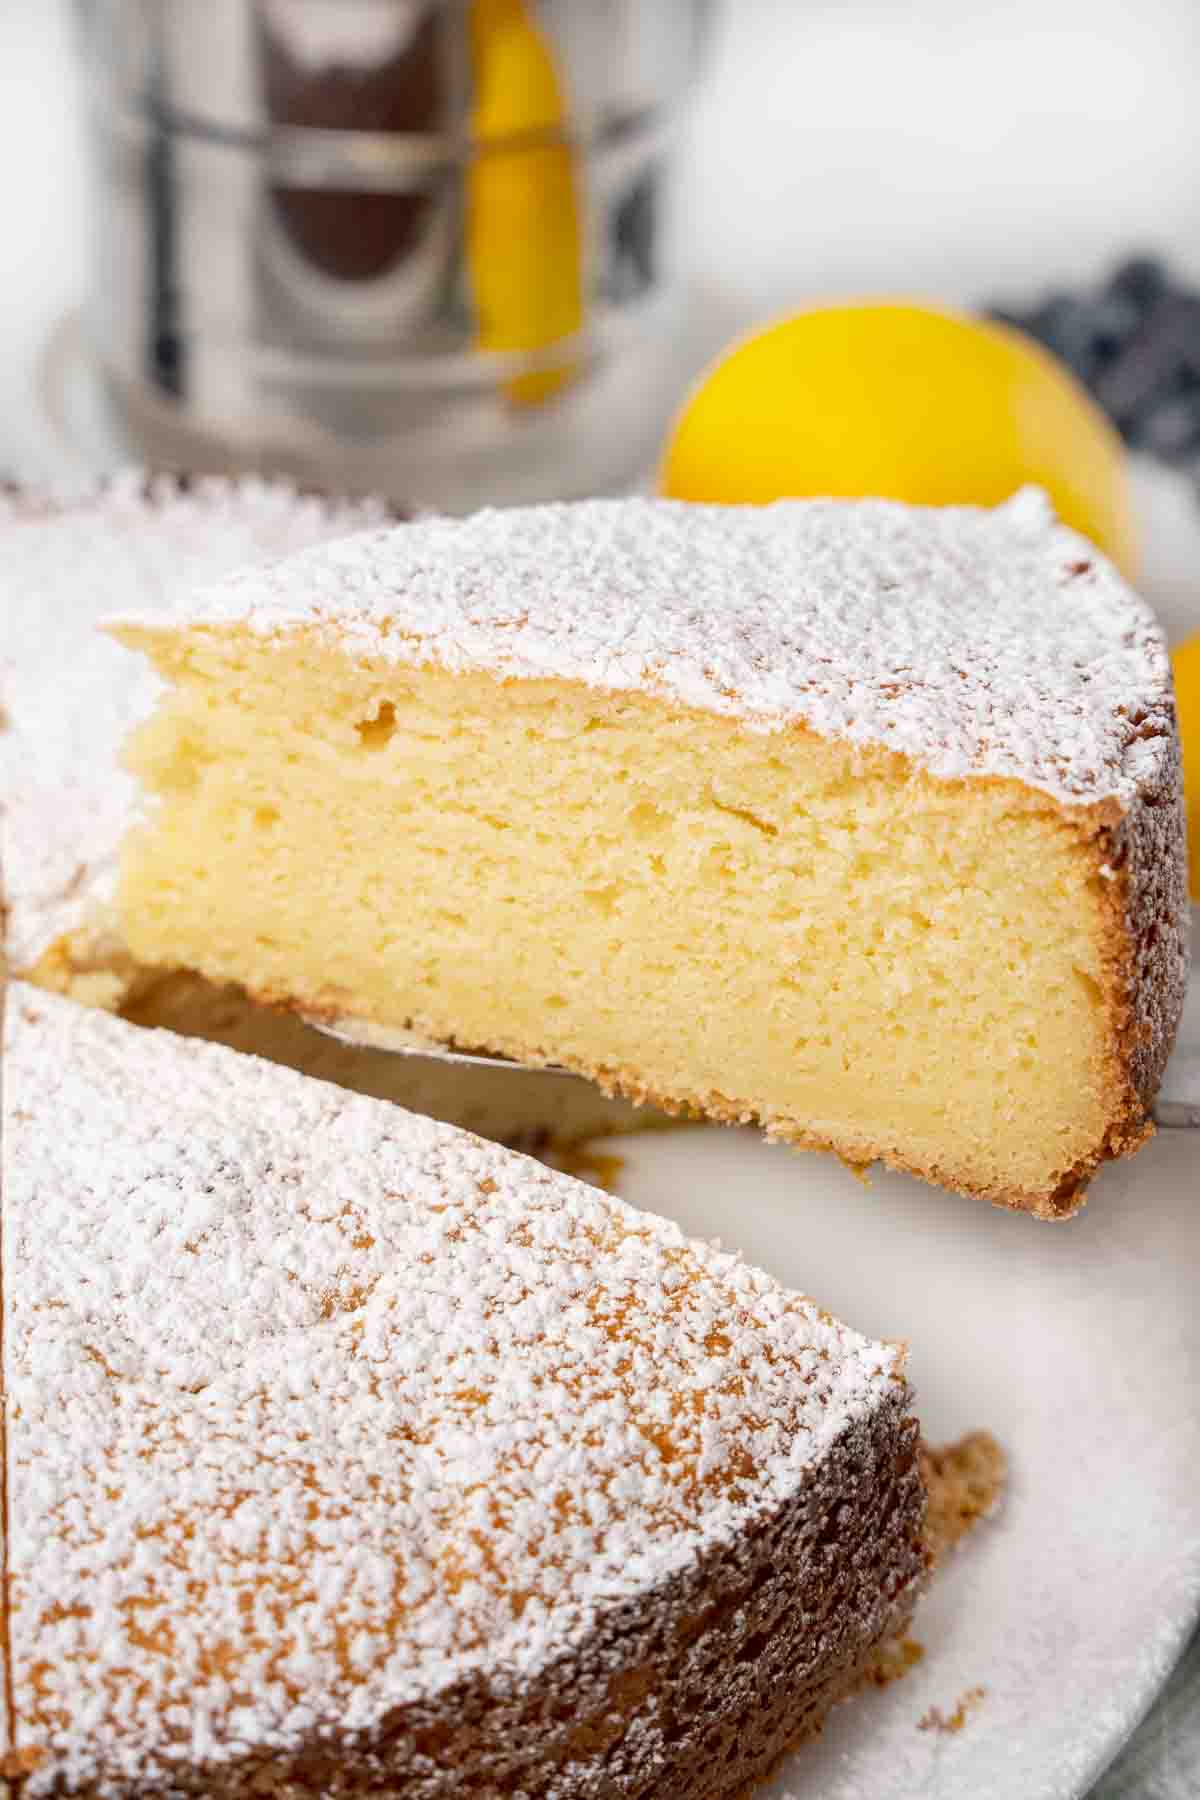 Slice of lemon ricotta cake on a spatula being taken out of whole cake.